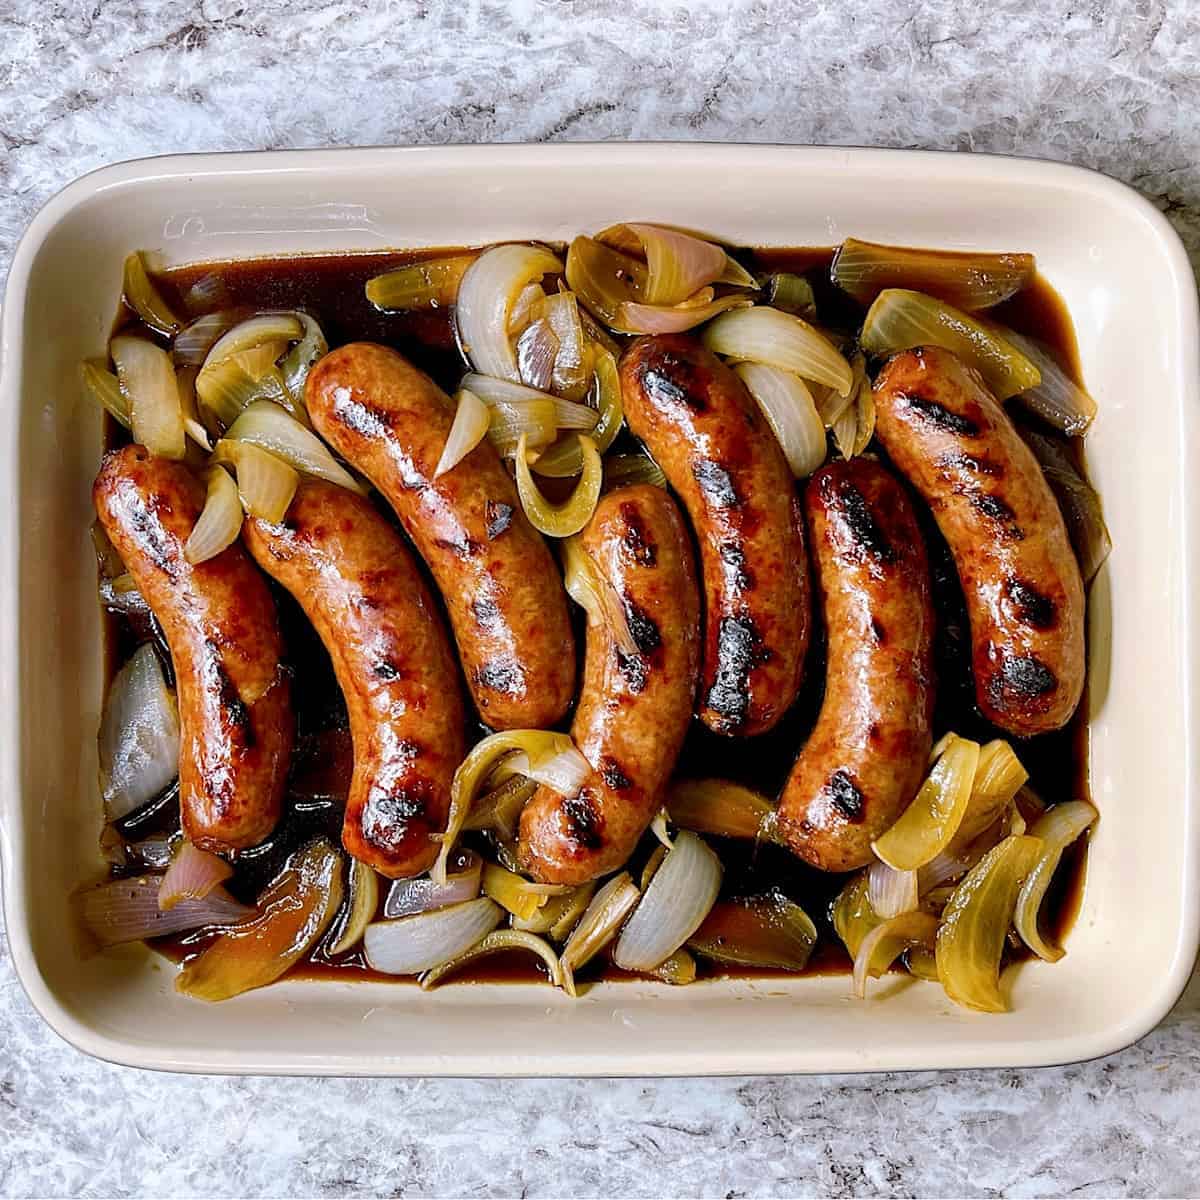 Guinness Beer Brats in casserole dish with onion